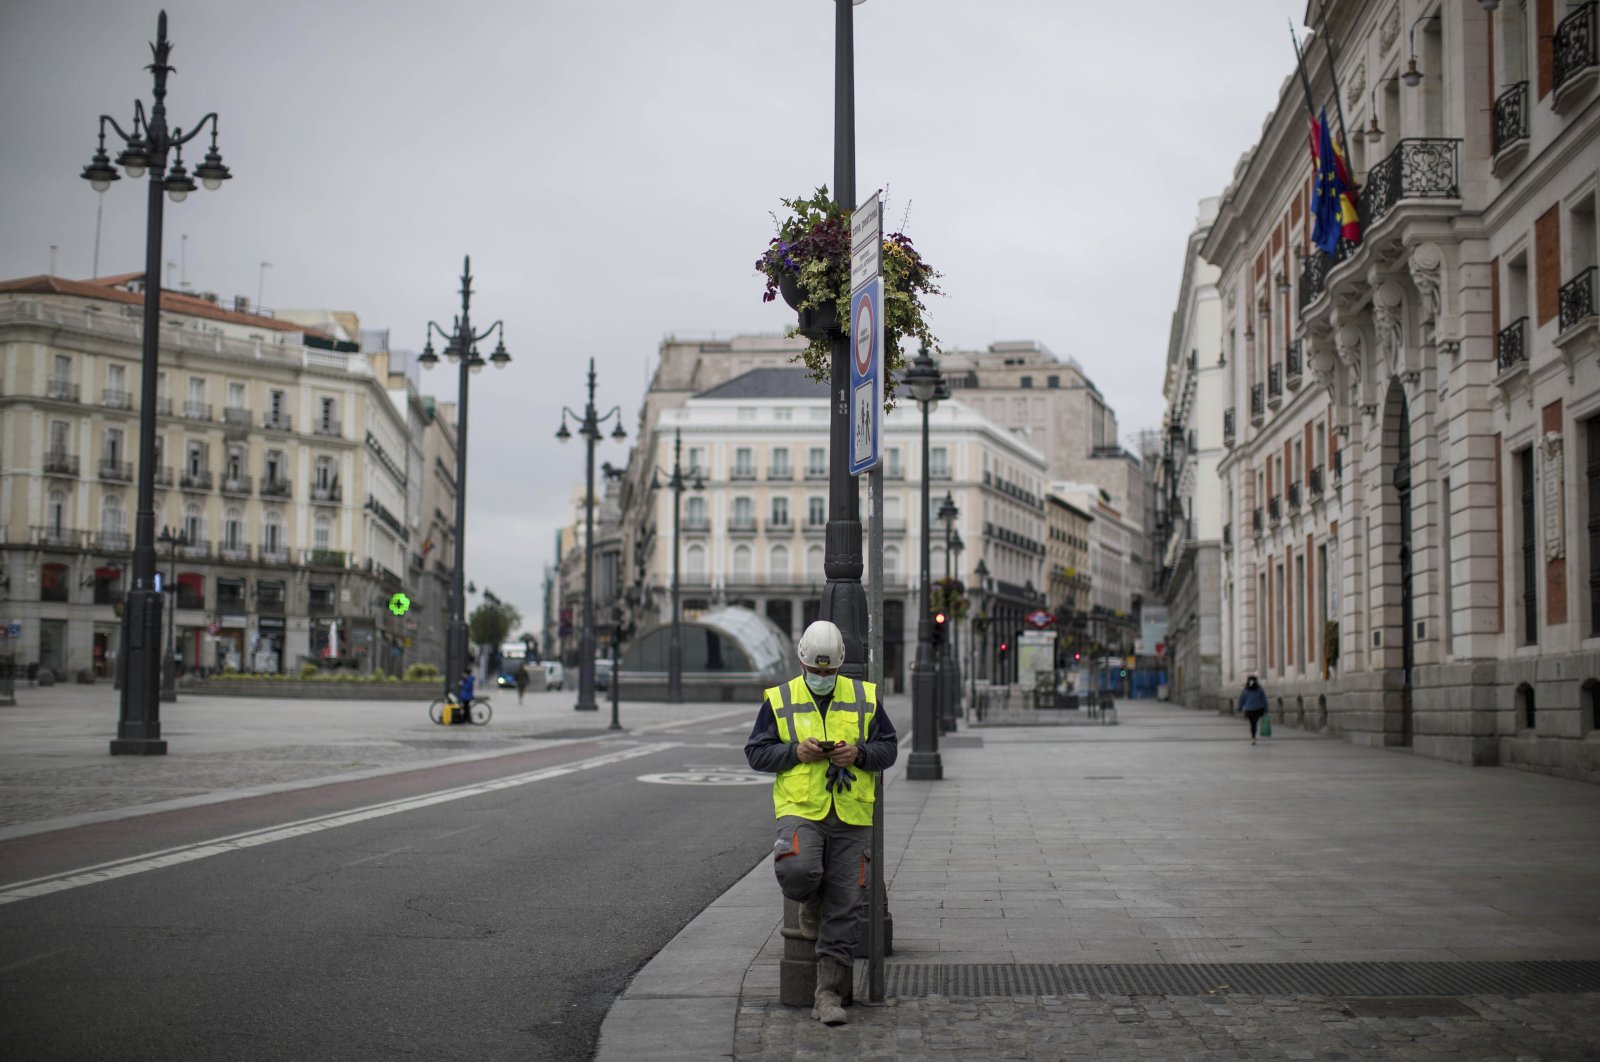 A worker checks his phone at the Sol square in Madrid, Spain, Tuesday, April 14, 2020.  (AP Photo)